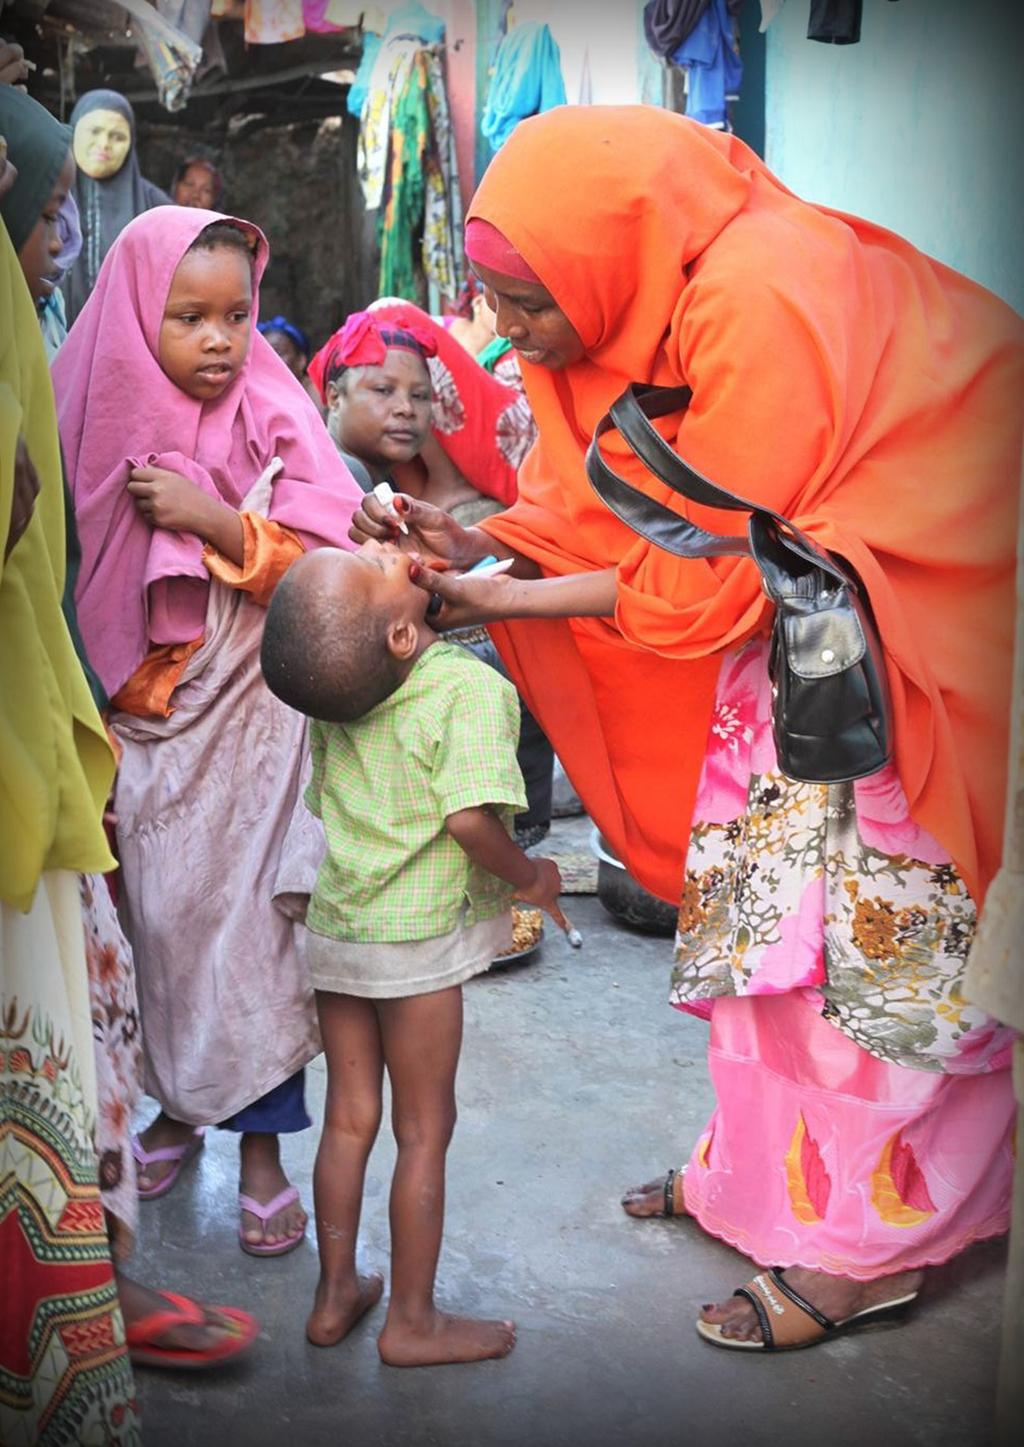 SOMALIA: A CALL FOR HUMANITARIAN AID Responding to the needs of those